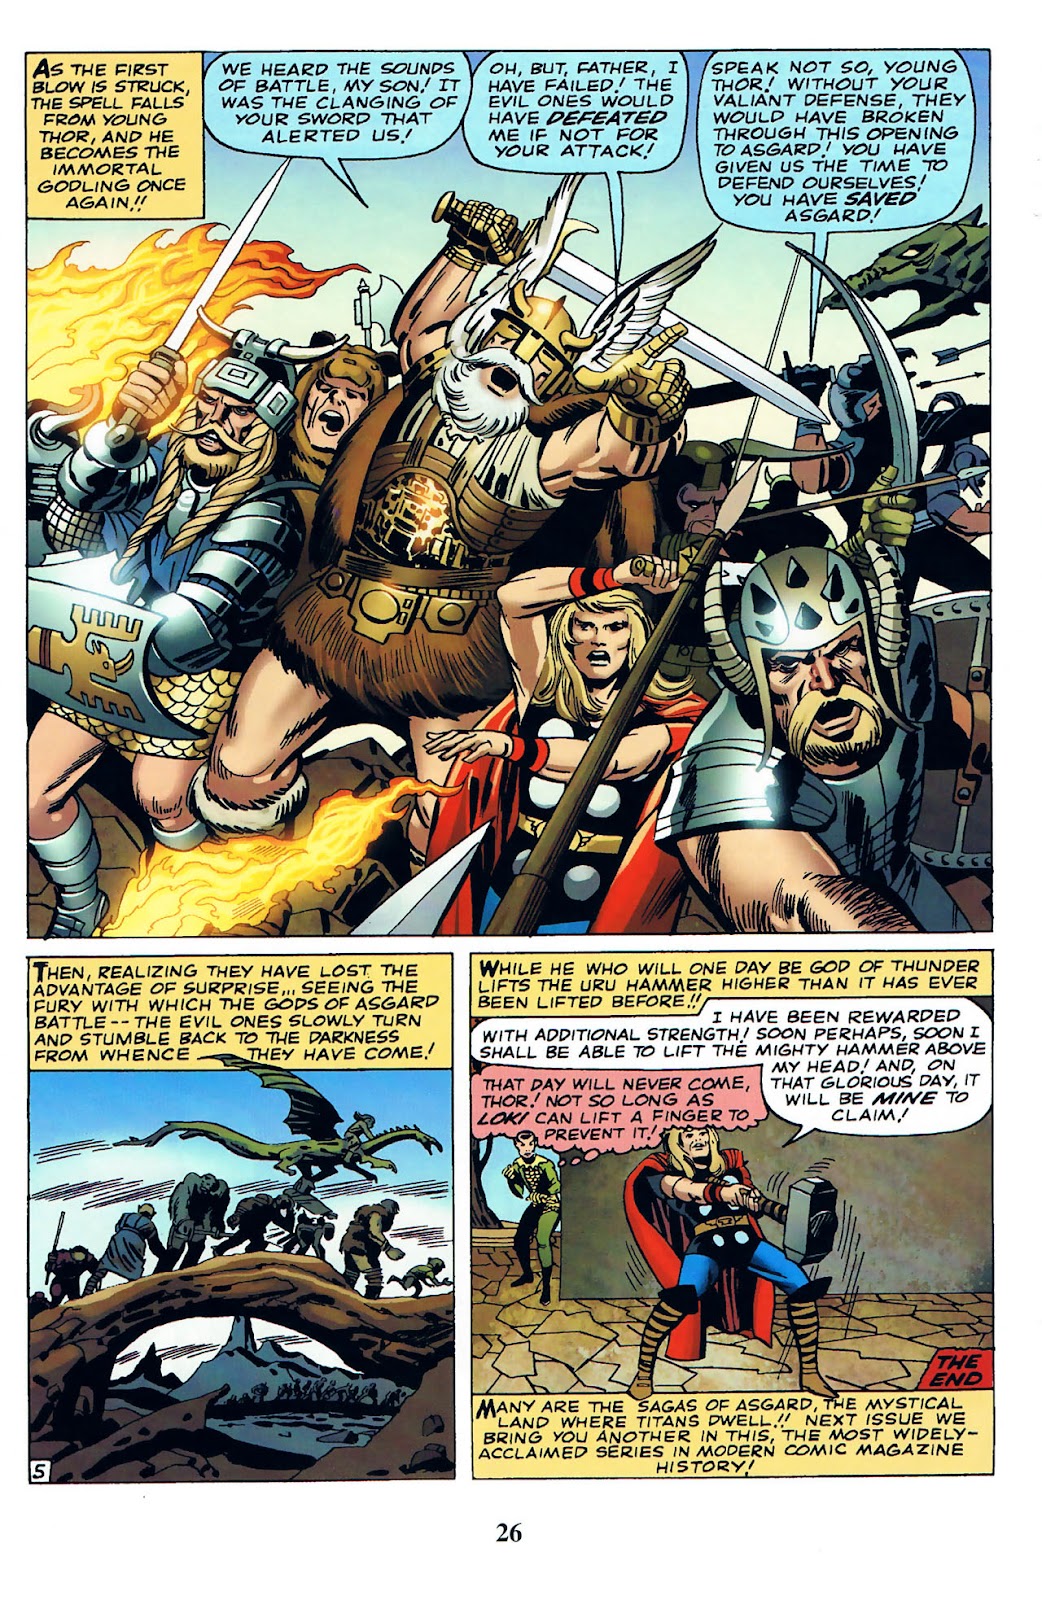 Thor: Tales of Asgard by Stan Lee & Jack Kirby issue 1 - Page 28